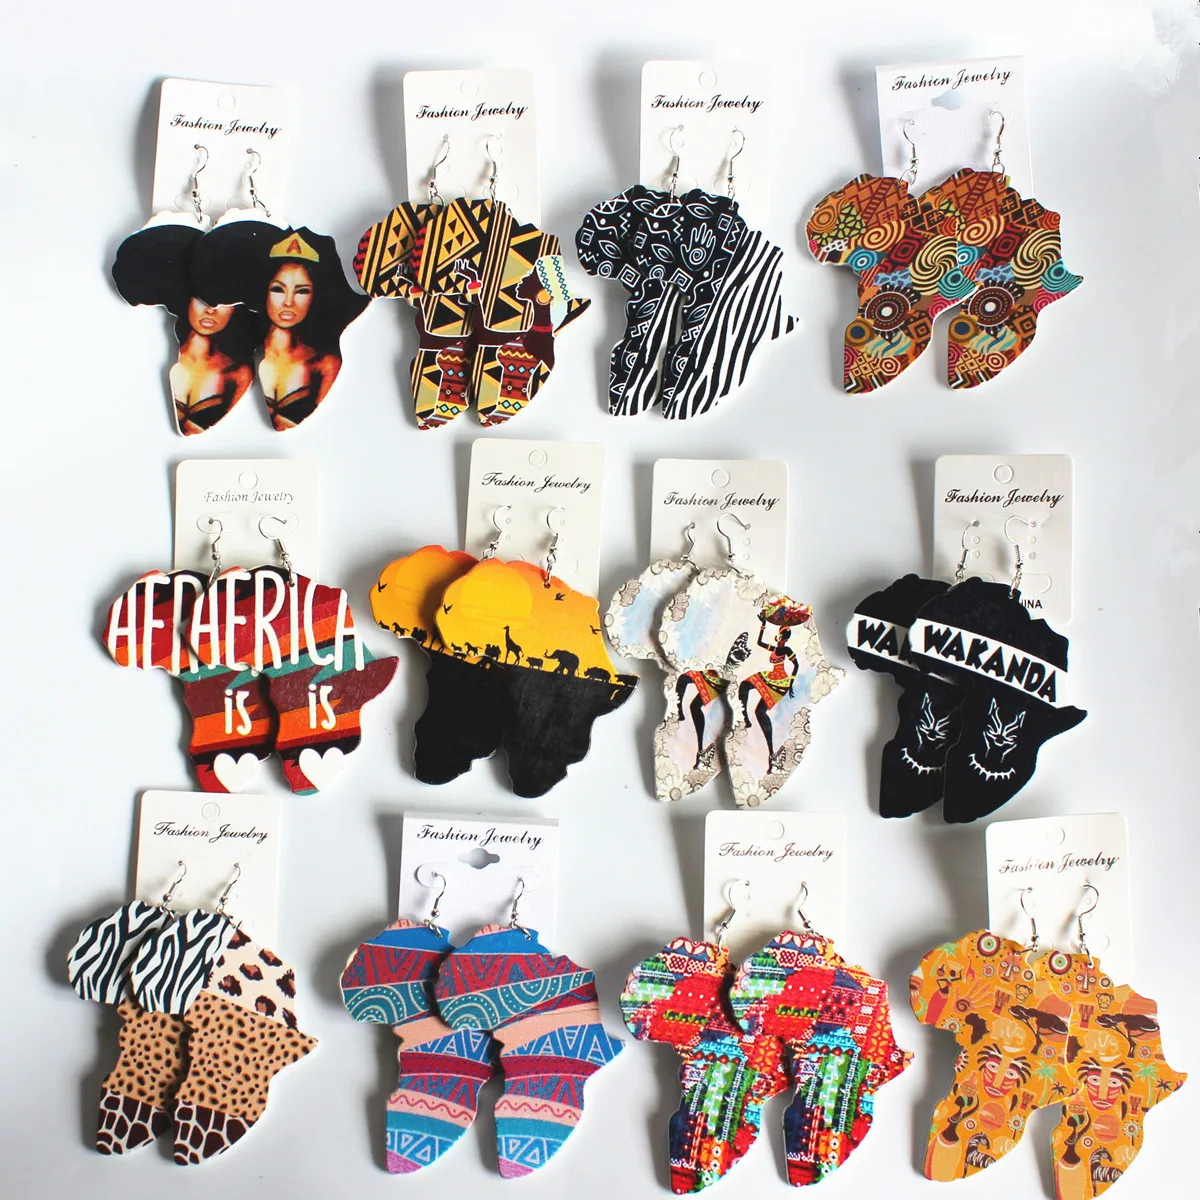 

Hot Selling Jewelry Africa Map Outline Wood Earring African Colorful Printed Stripes Geometric Earrings For Women, Picture shows